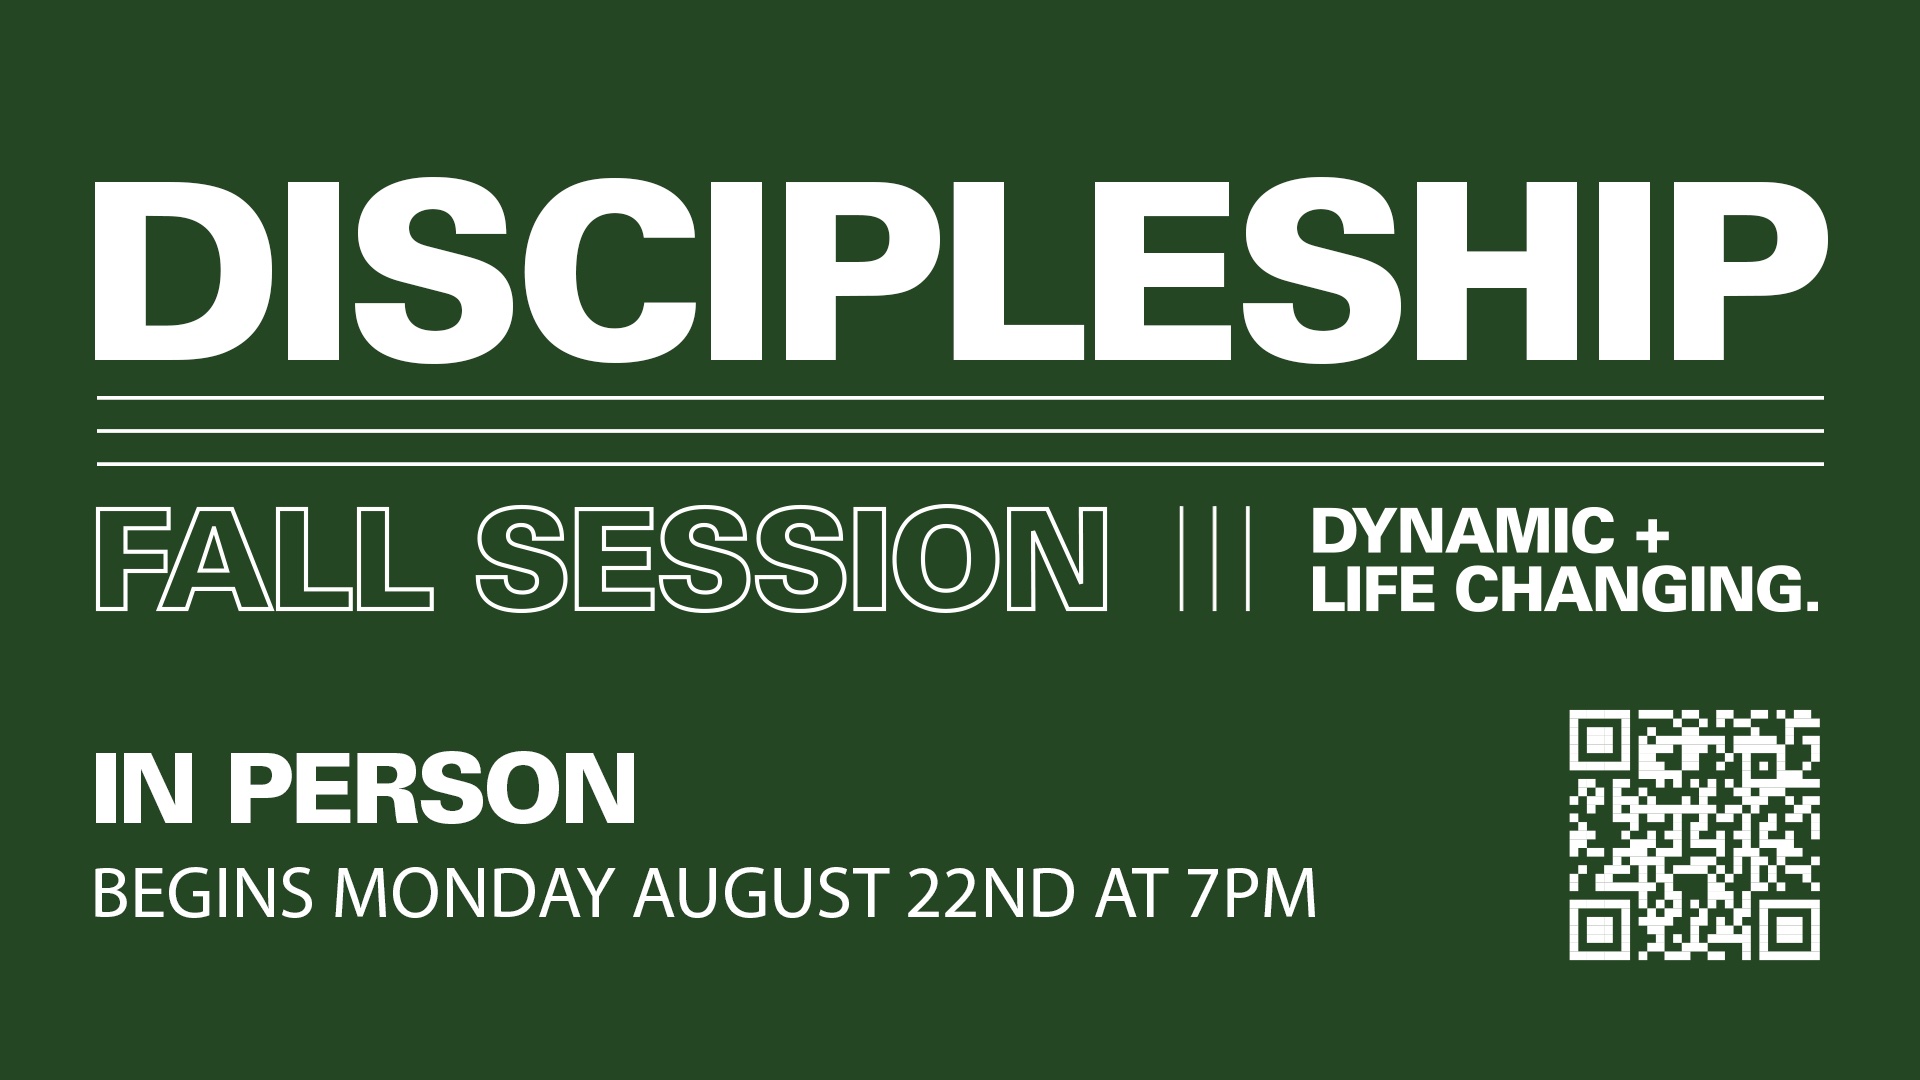 School of Discipleship - Fall Session at the Spartanburg campus